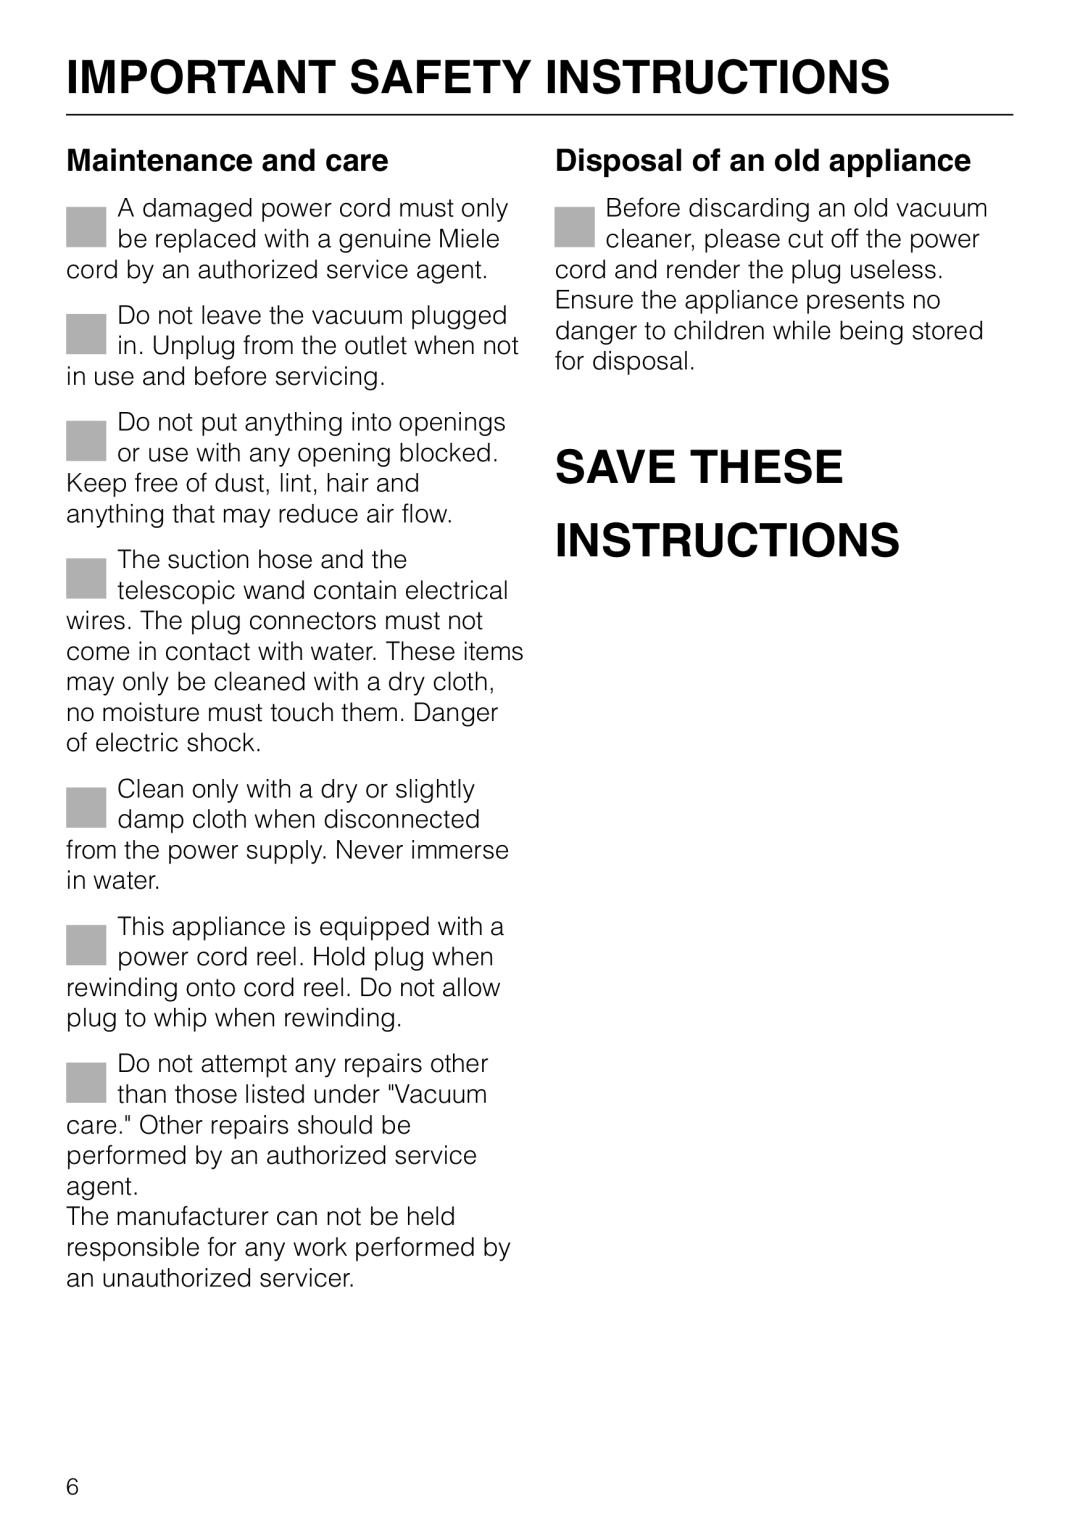 Miele S 548 Save These Instructions, Important Safety Instructions, Maintenance and care, Disposal of an old appliance 